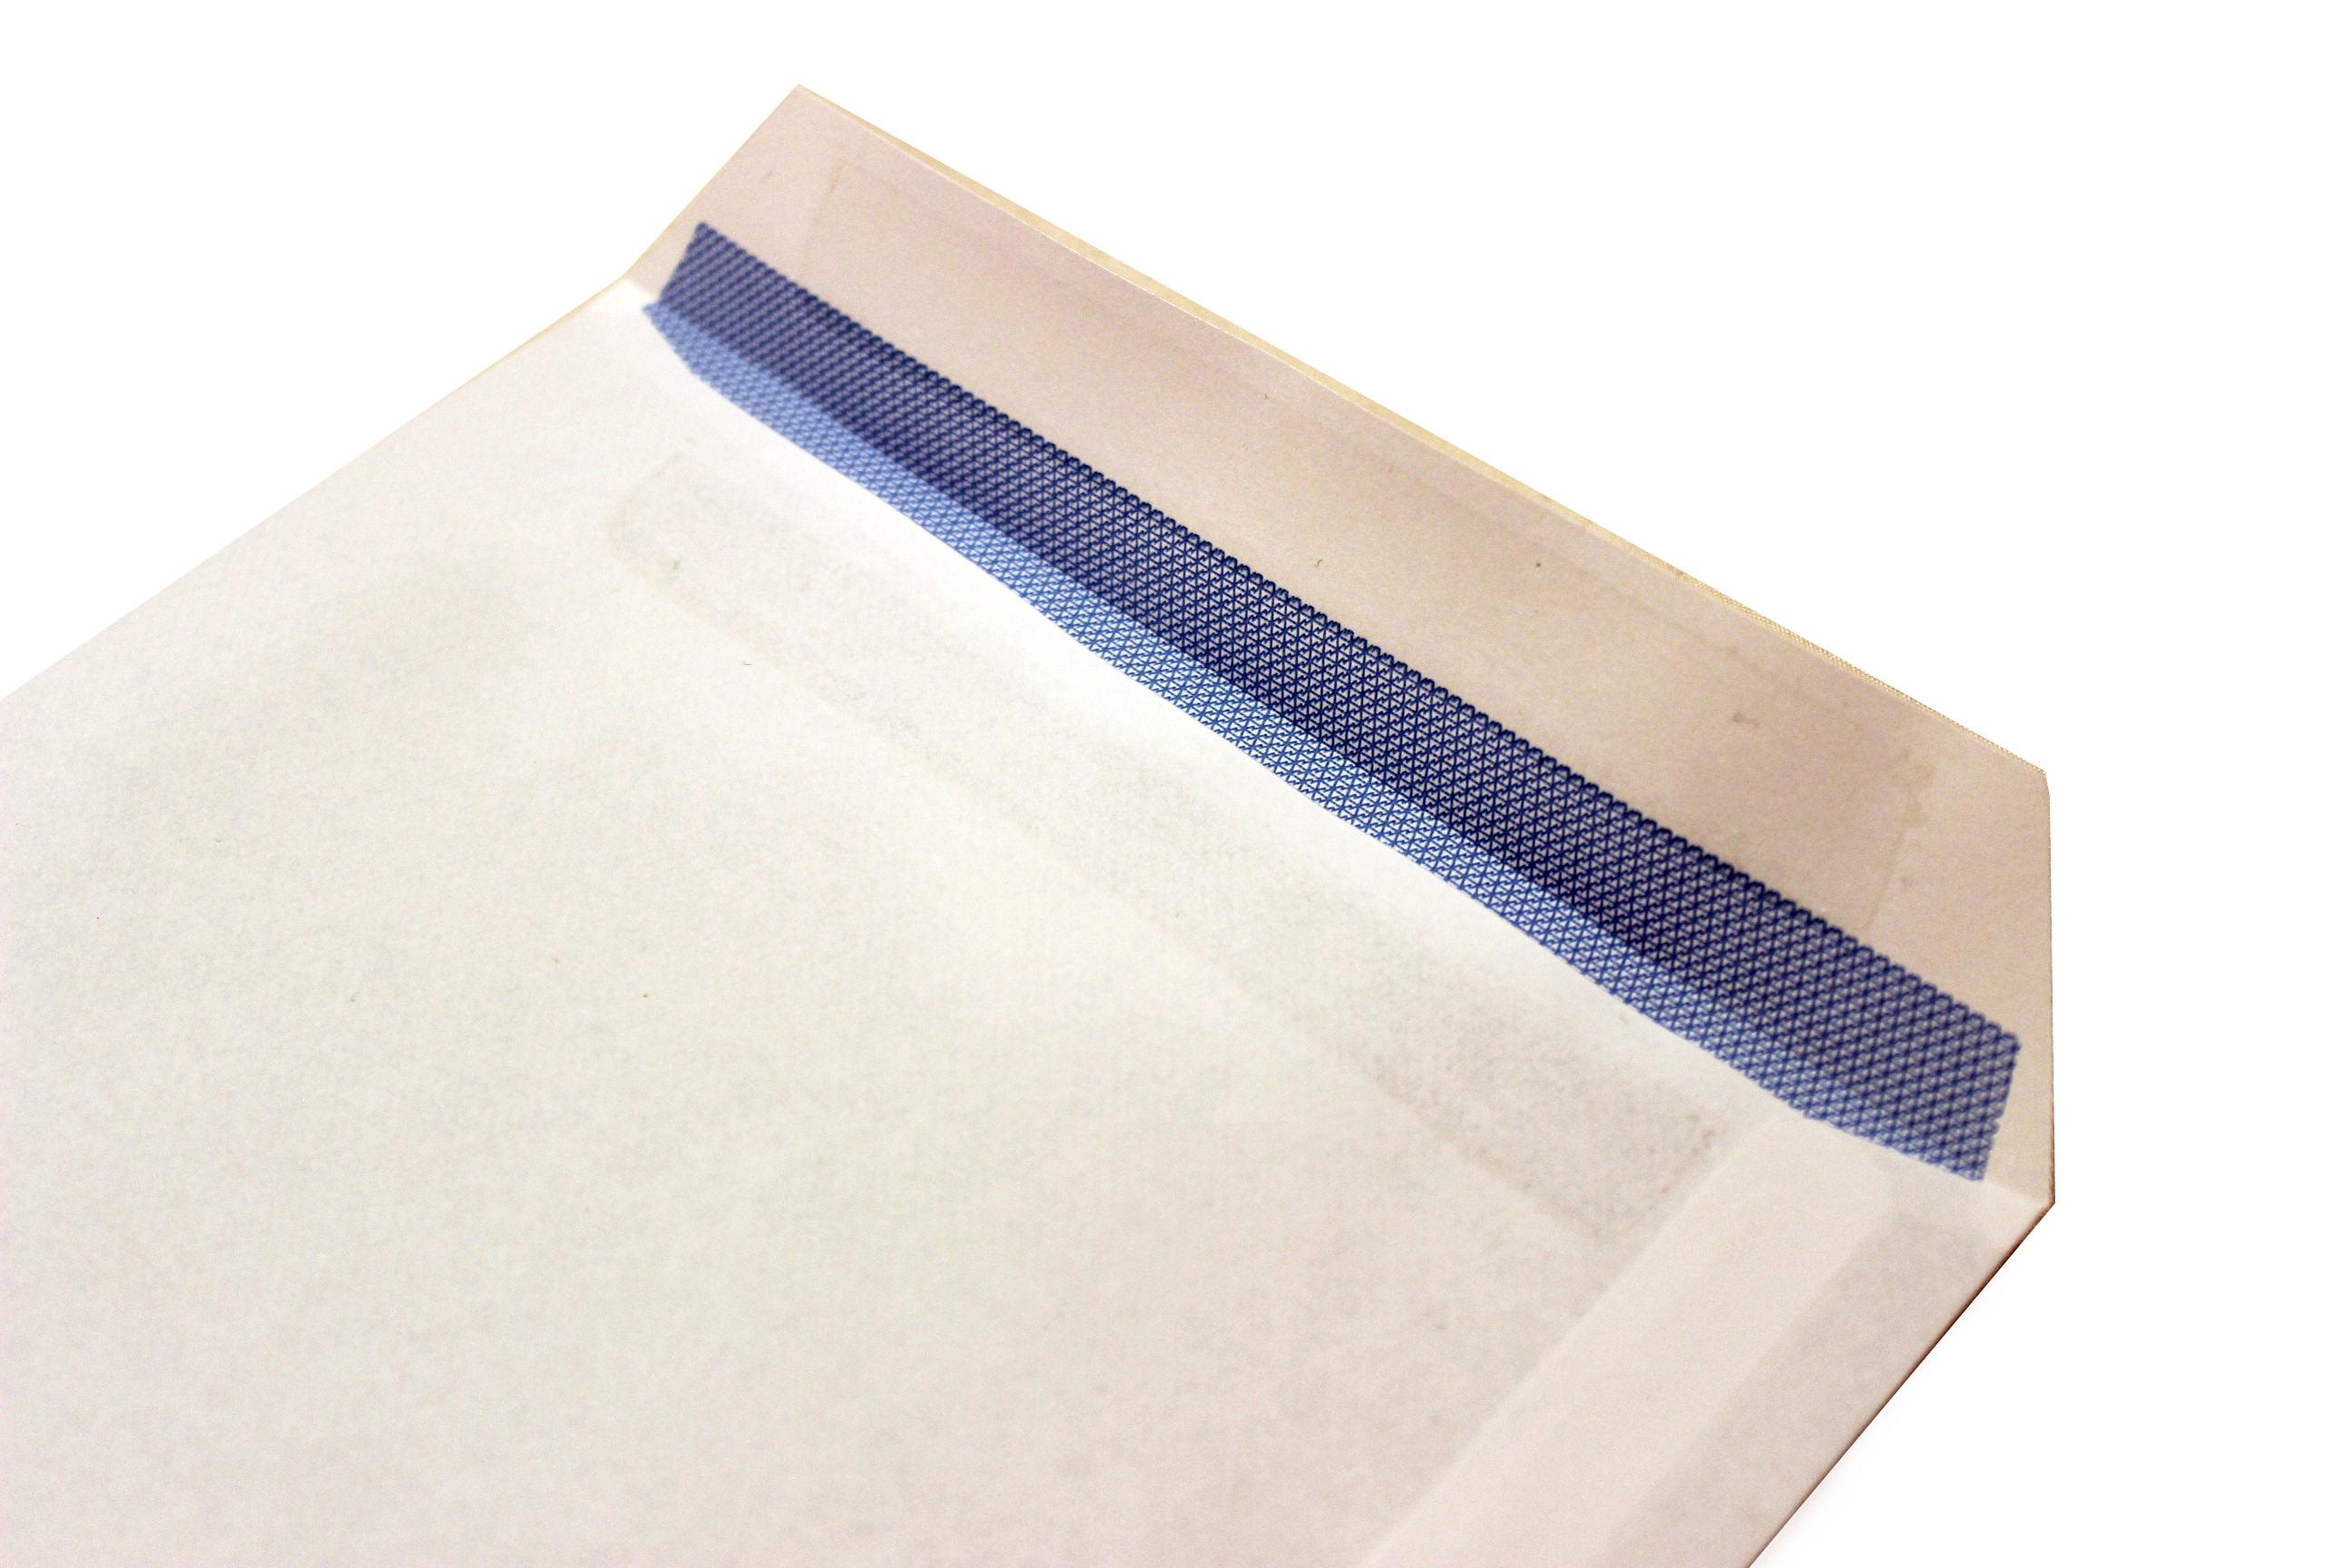 C5 Envelope with flap open